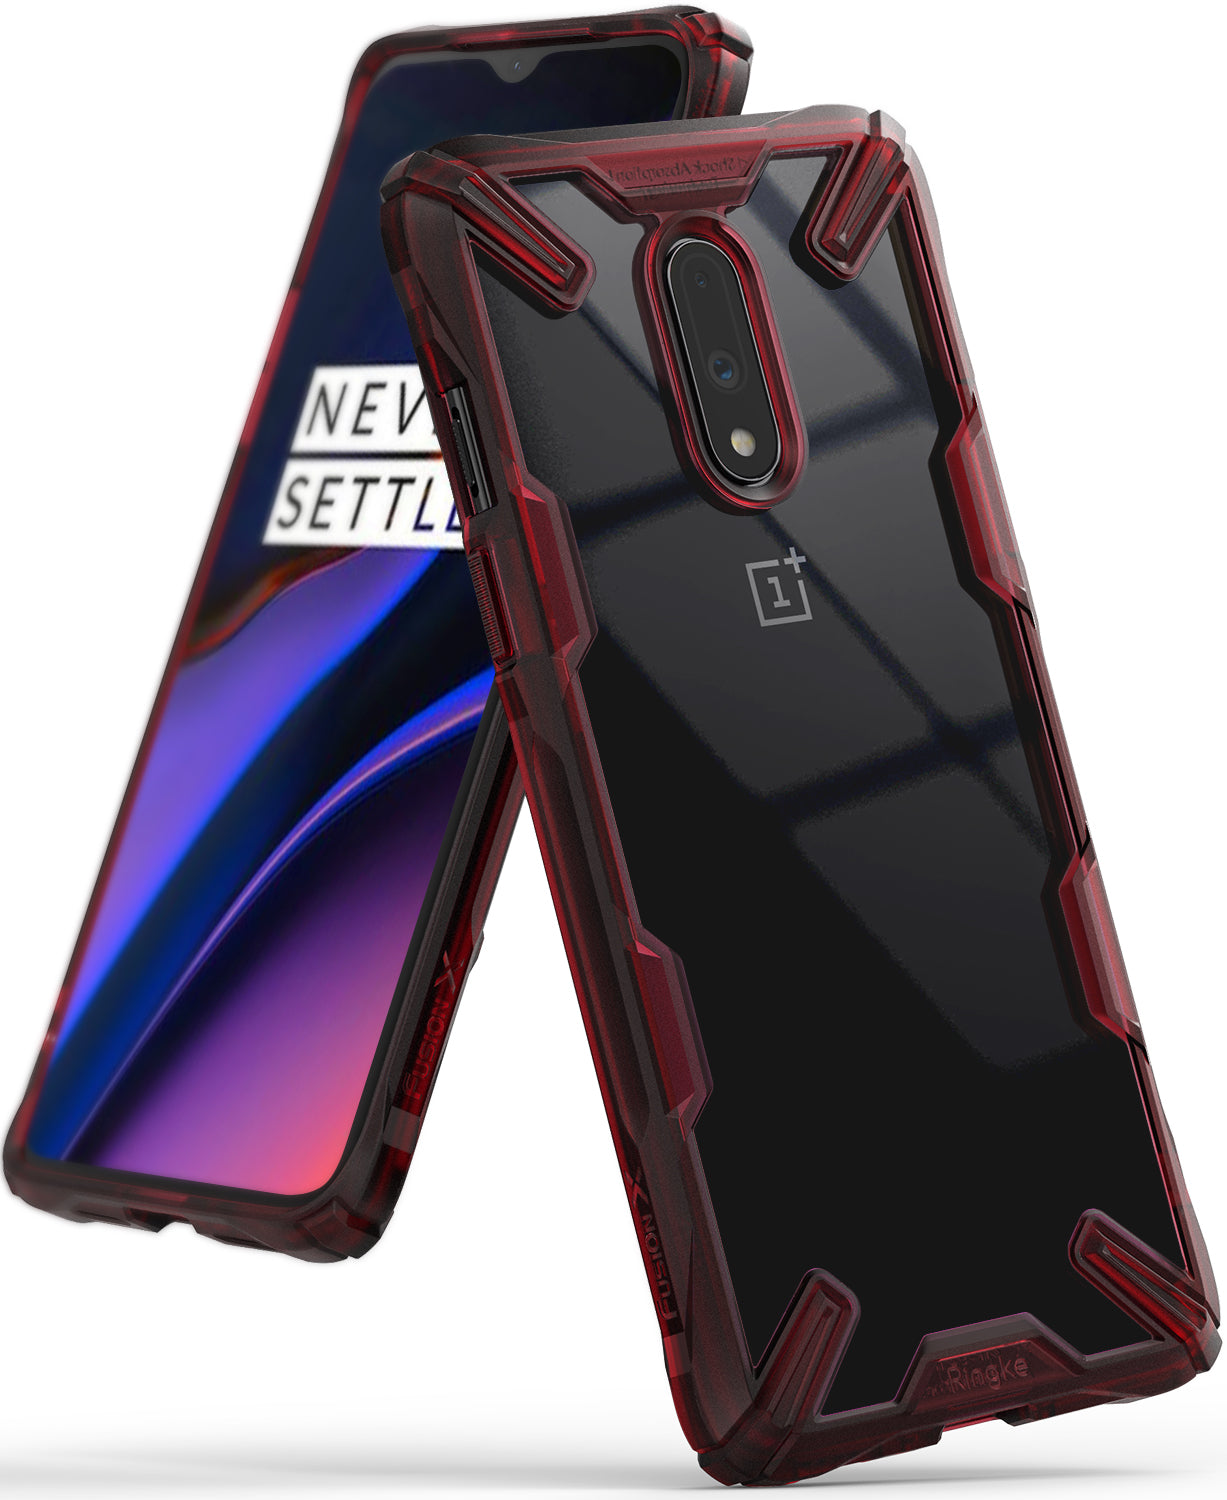 OnePlus 7 Case | Ringke Fusion-X – Ringke Official Store